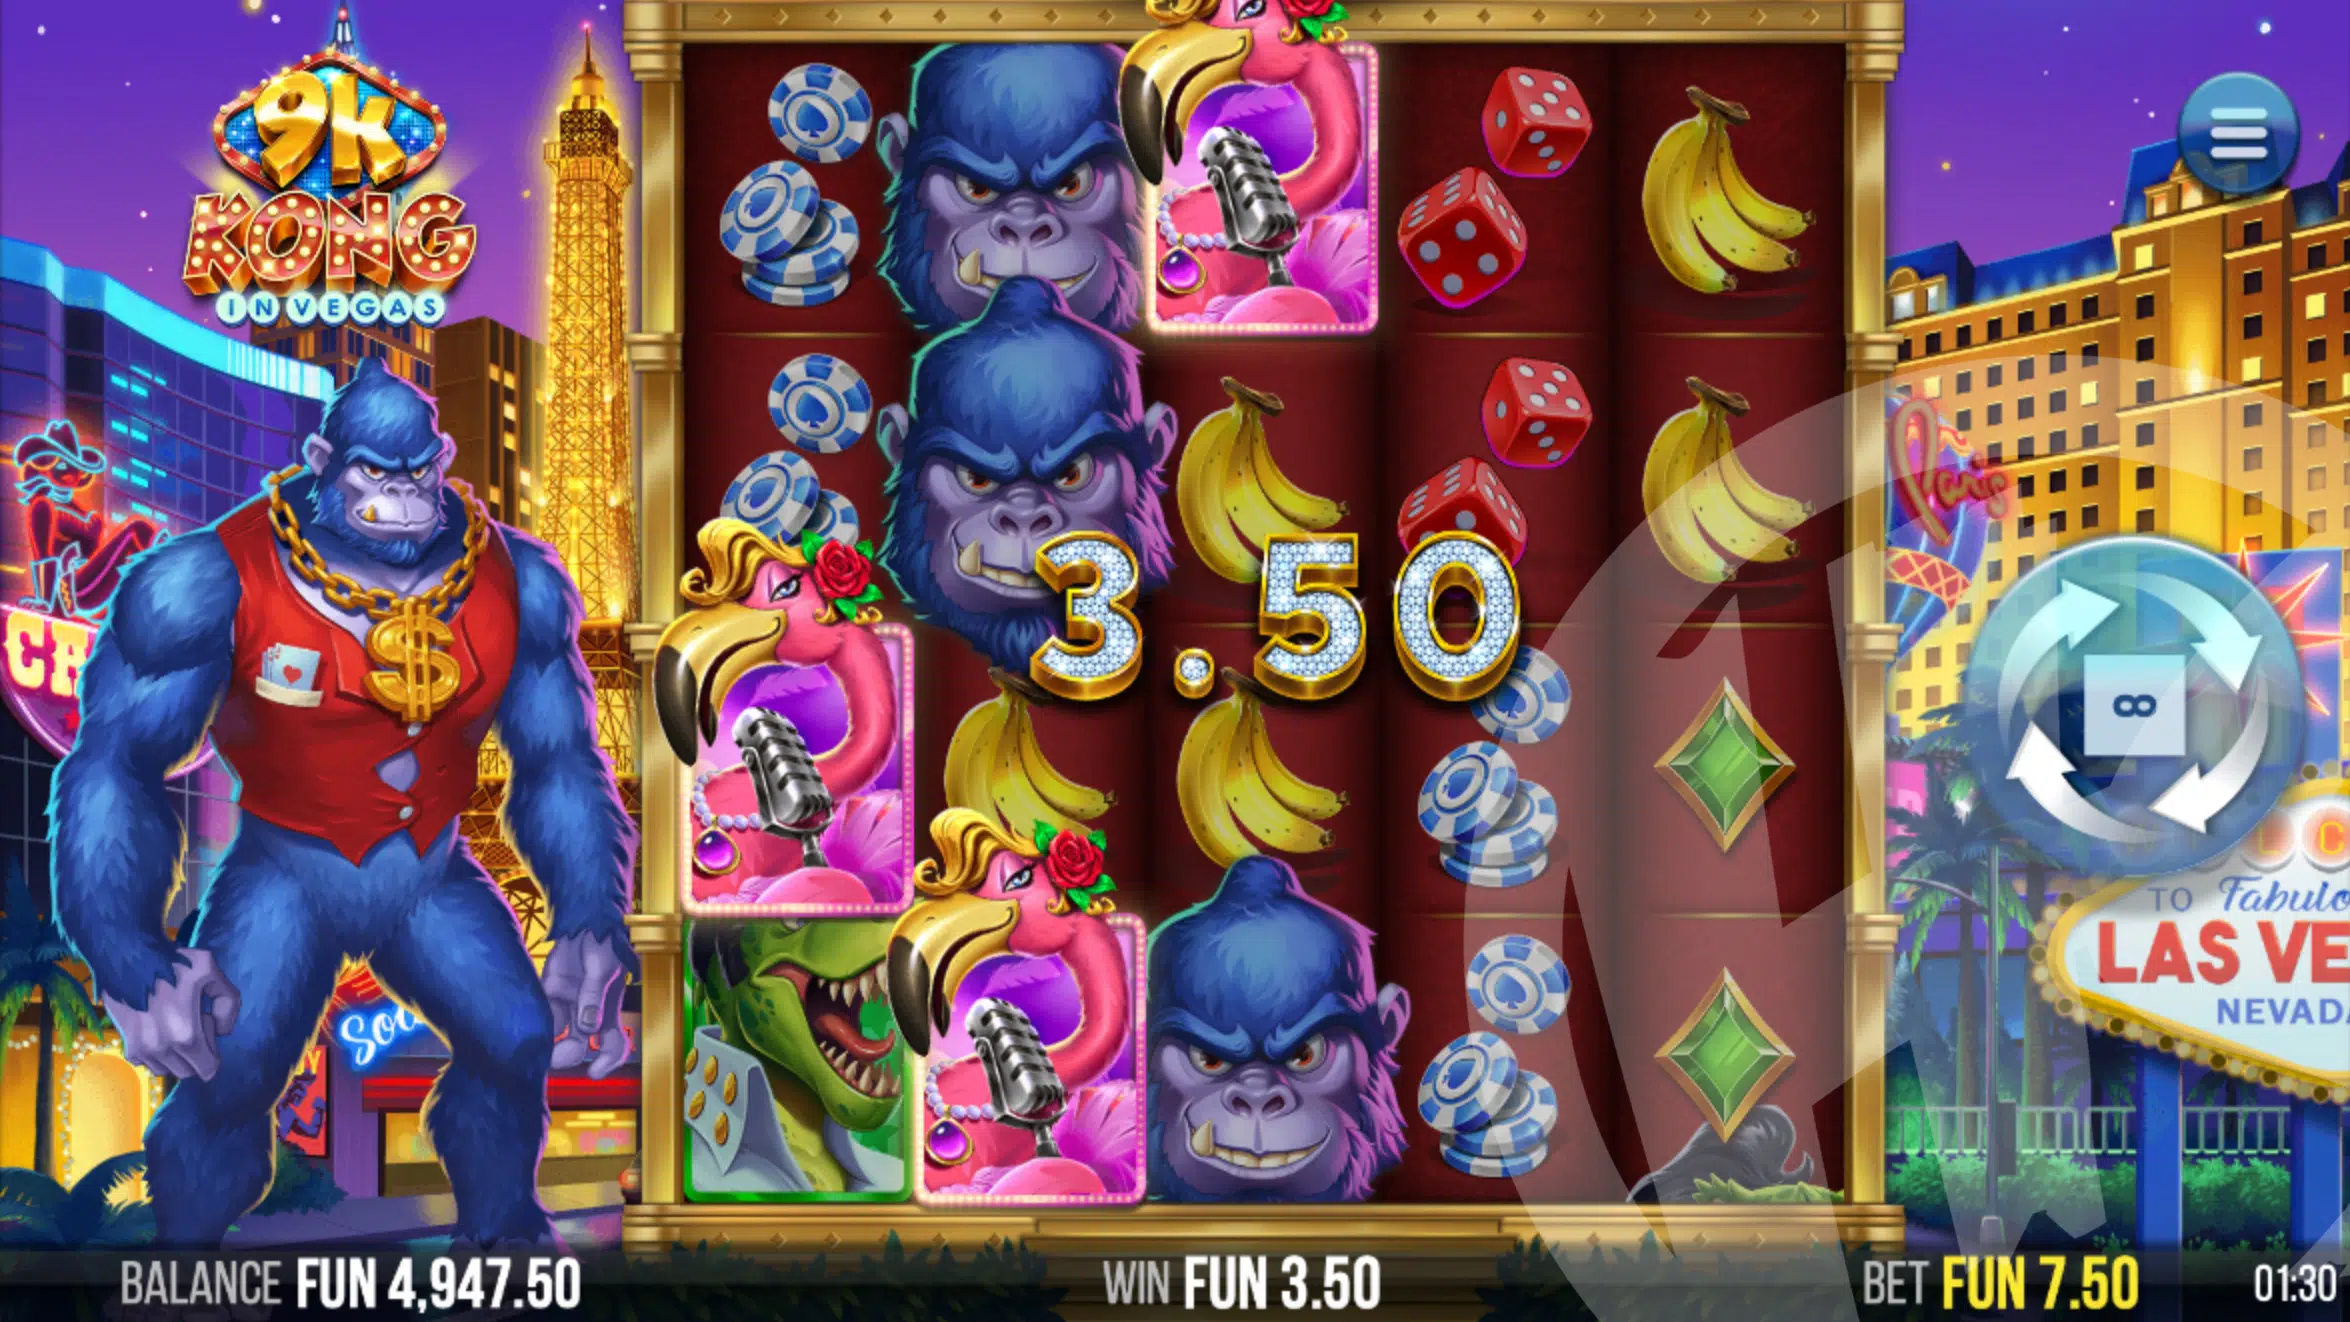 9k Kong in Vegas Offers Players 1,024 Ways to Win